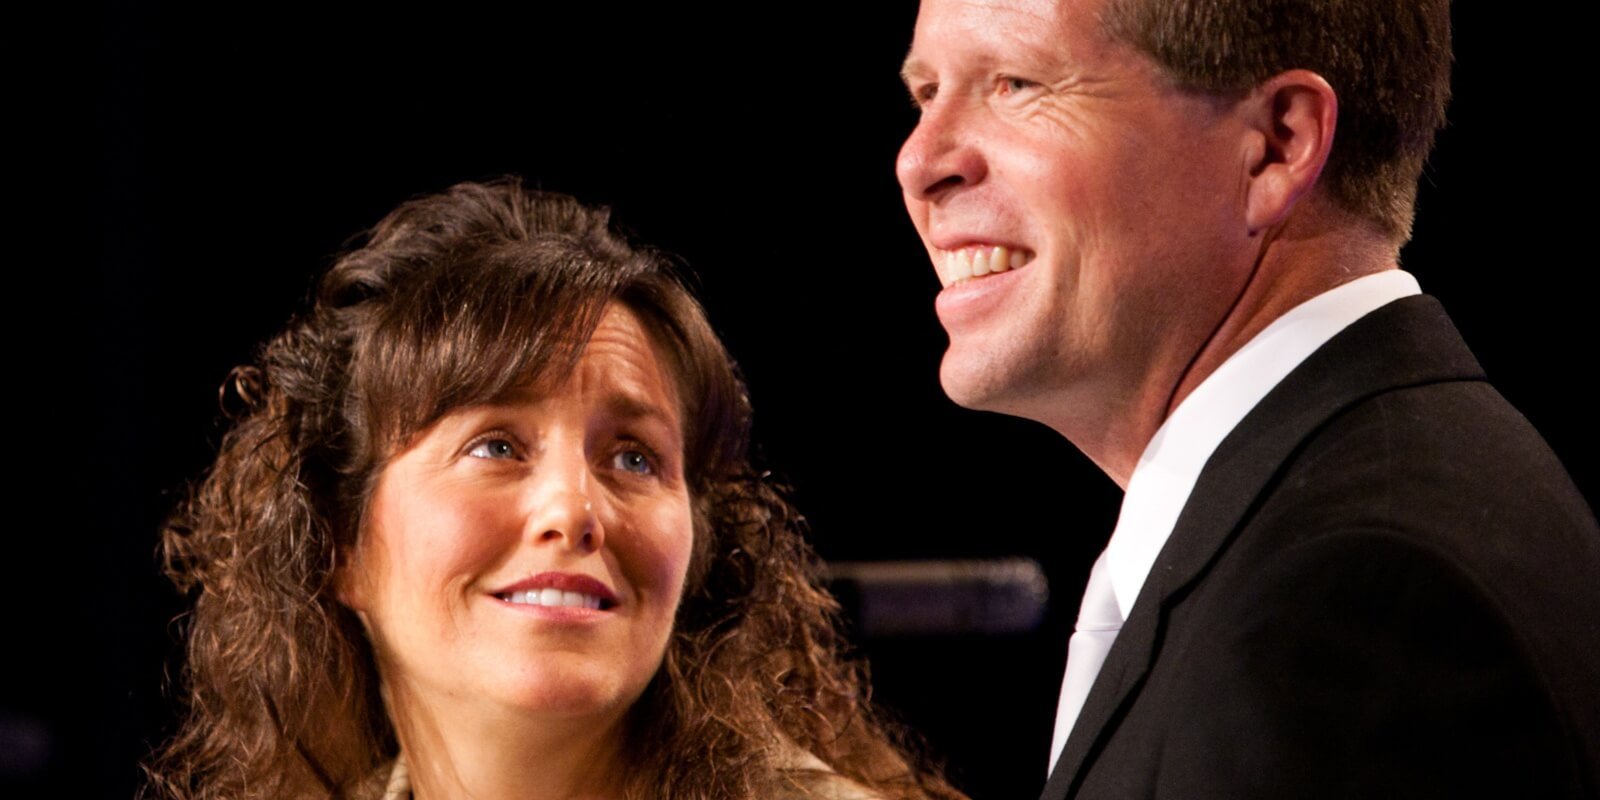 Michelle and Jim Bob Duggar speak at a conference in 2010 in Washington, DC.